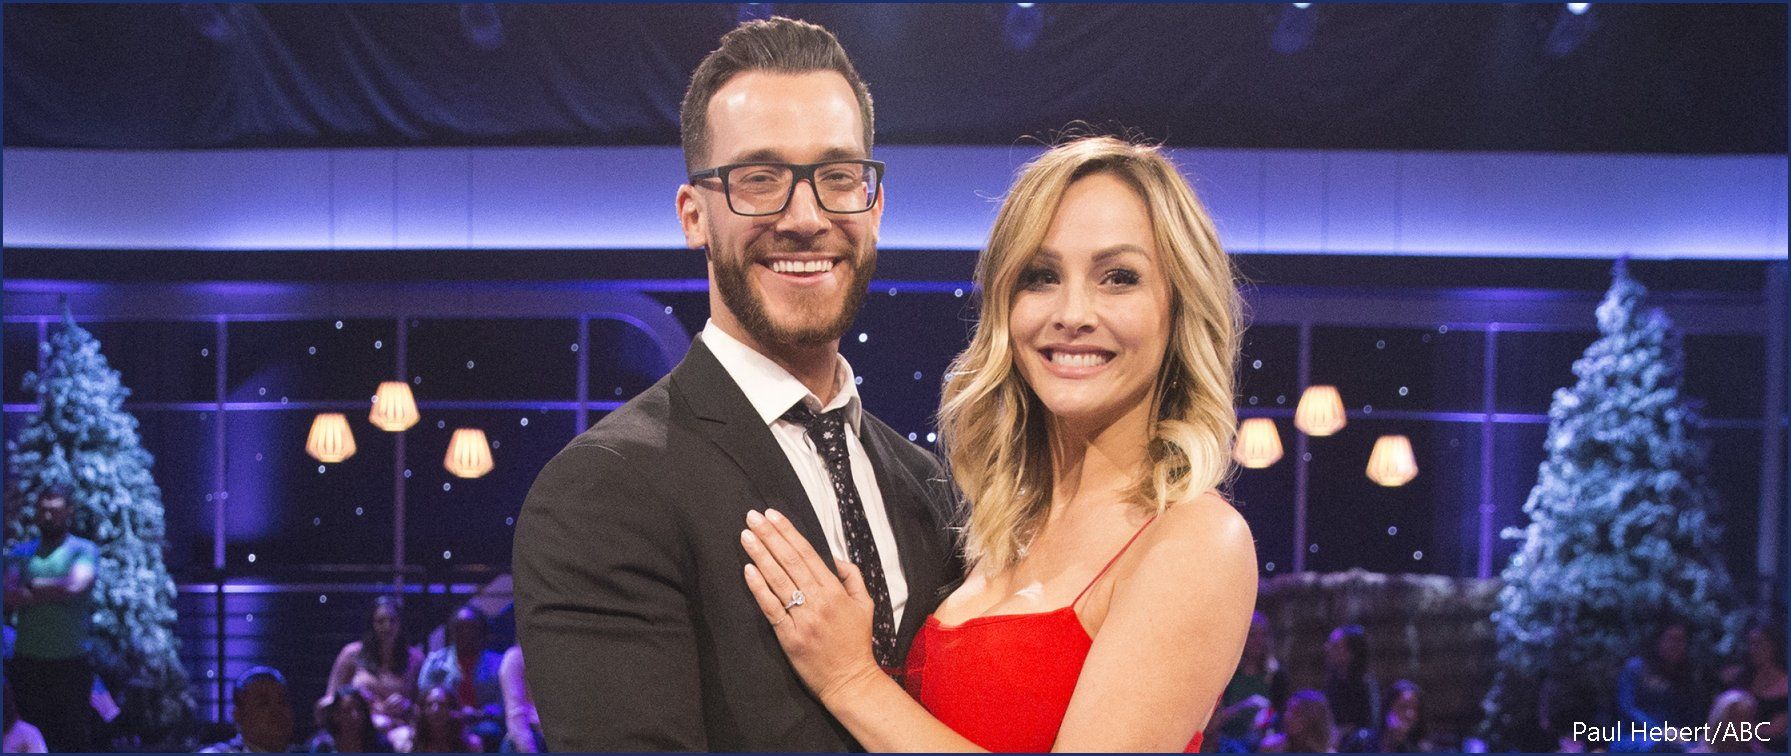 The Bachelor Winter Games' stars Clare Crawley and Benoit